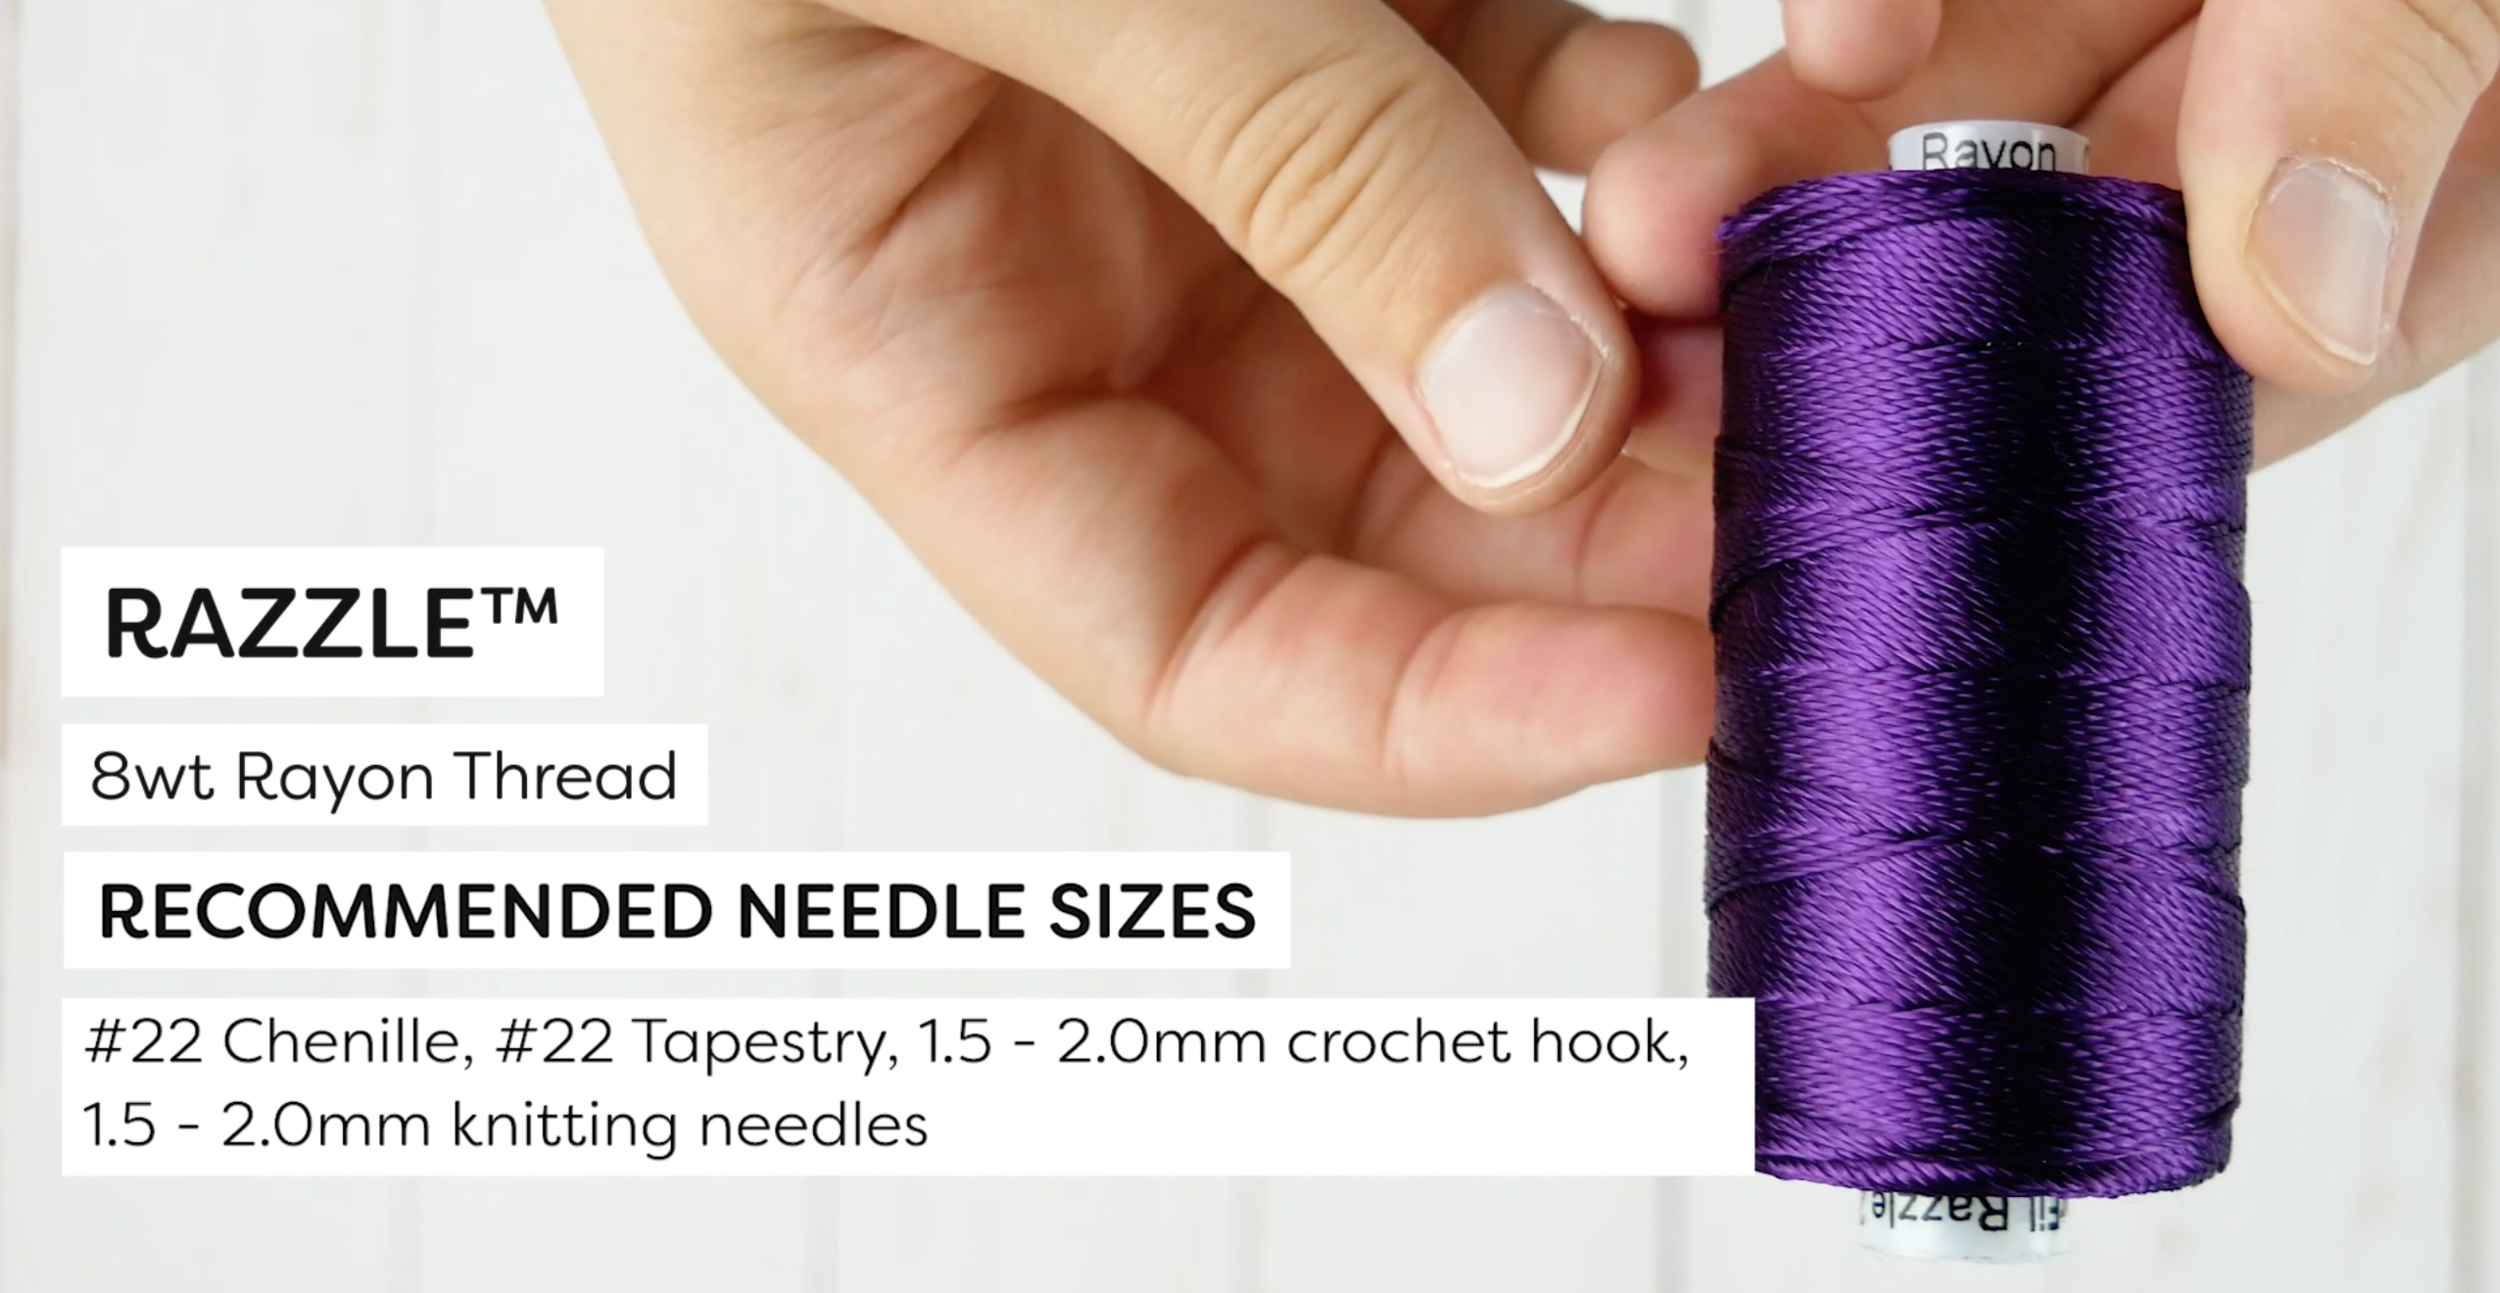 WonderFil Specialty Threads - Choosing the Best Hand Embroidery Thread